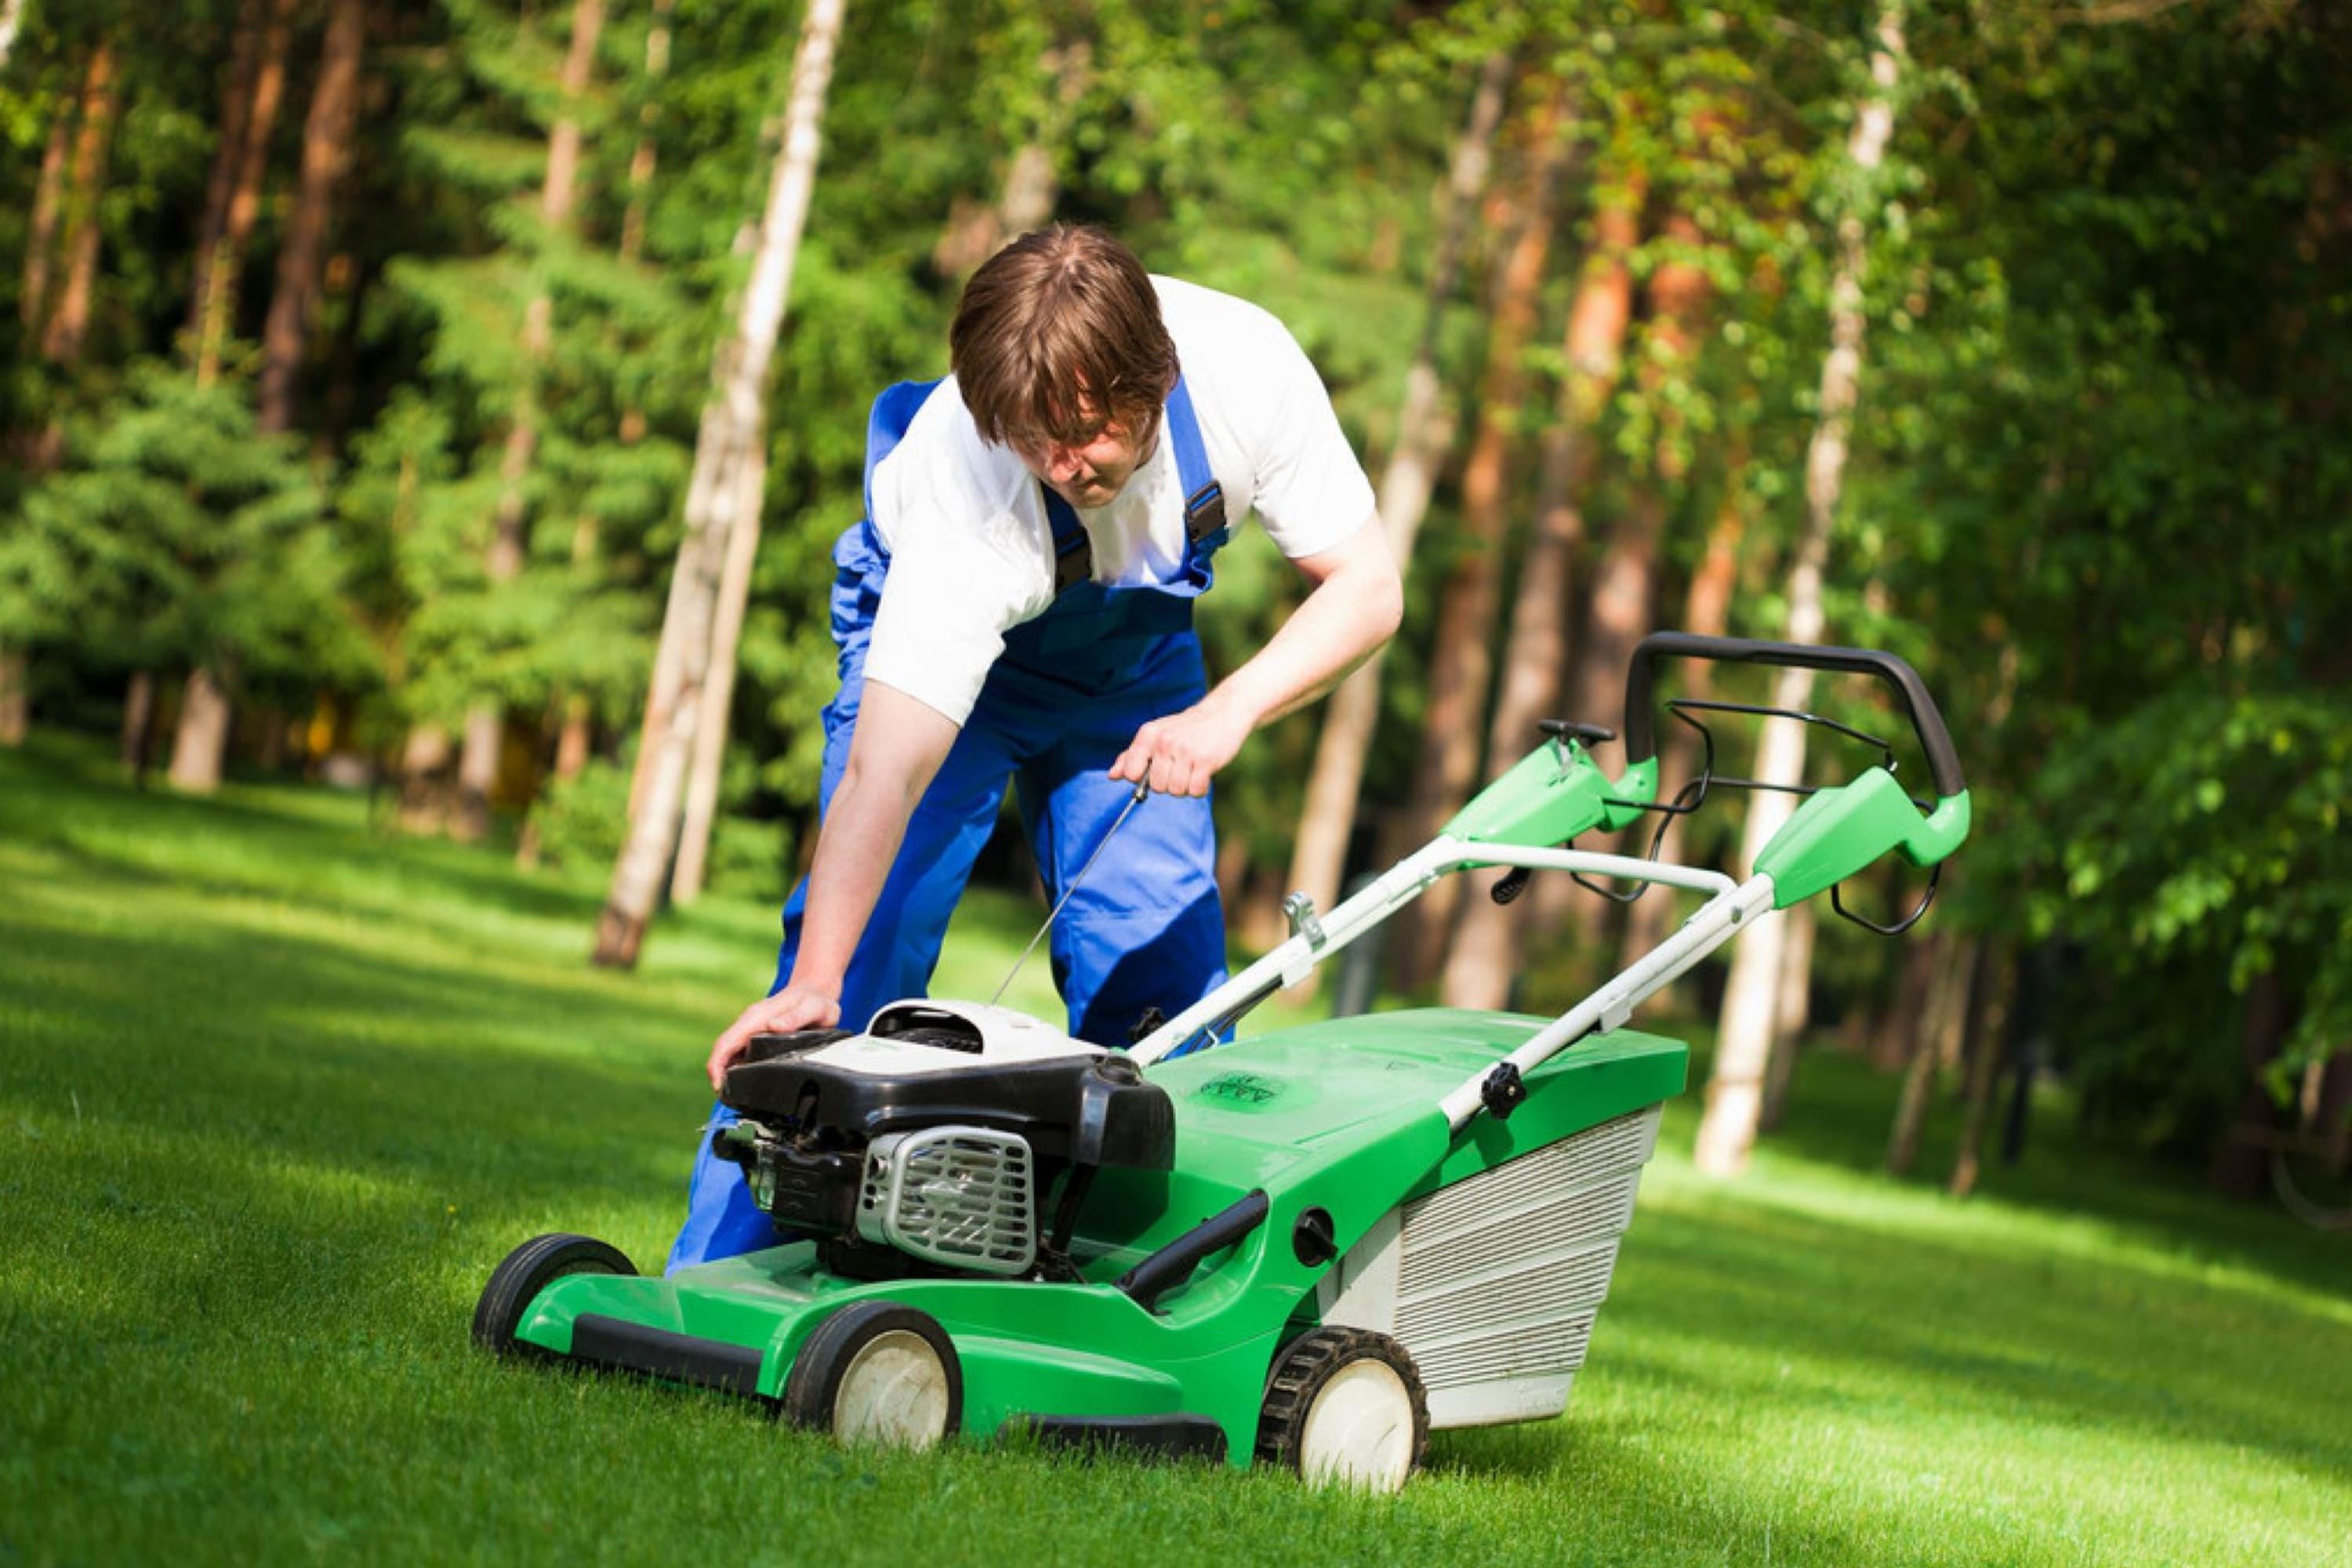 Mowing a Wet Lawn Can Easily Spread Fungal Disease